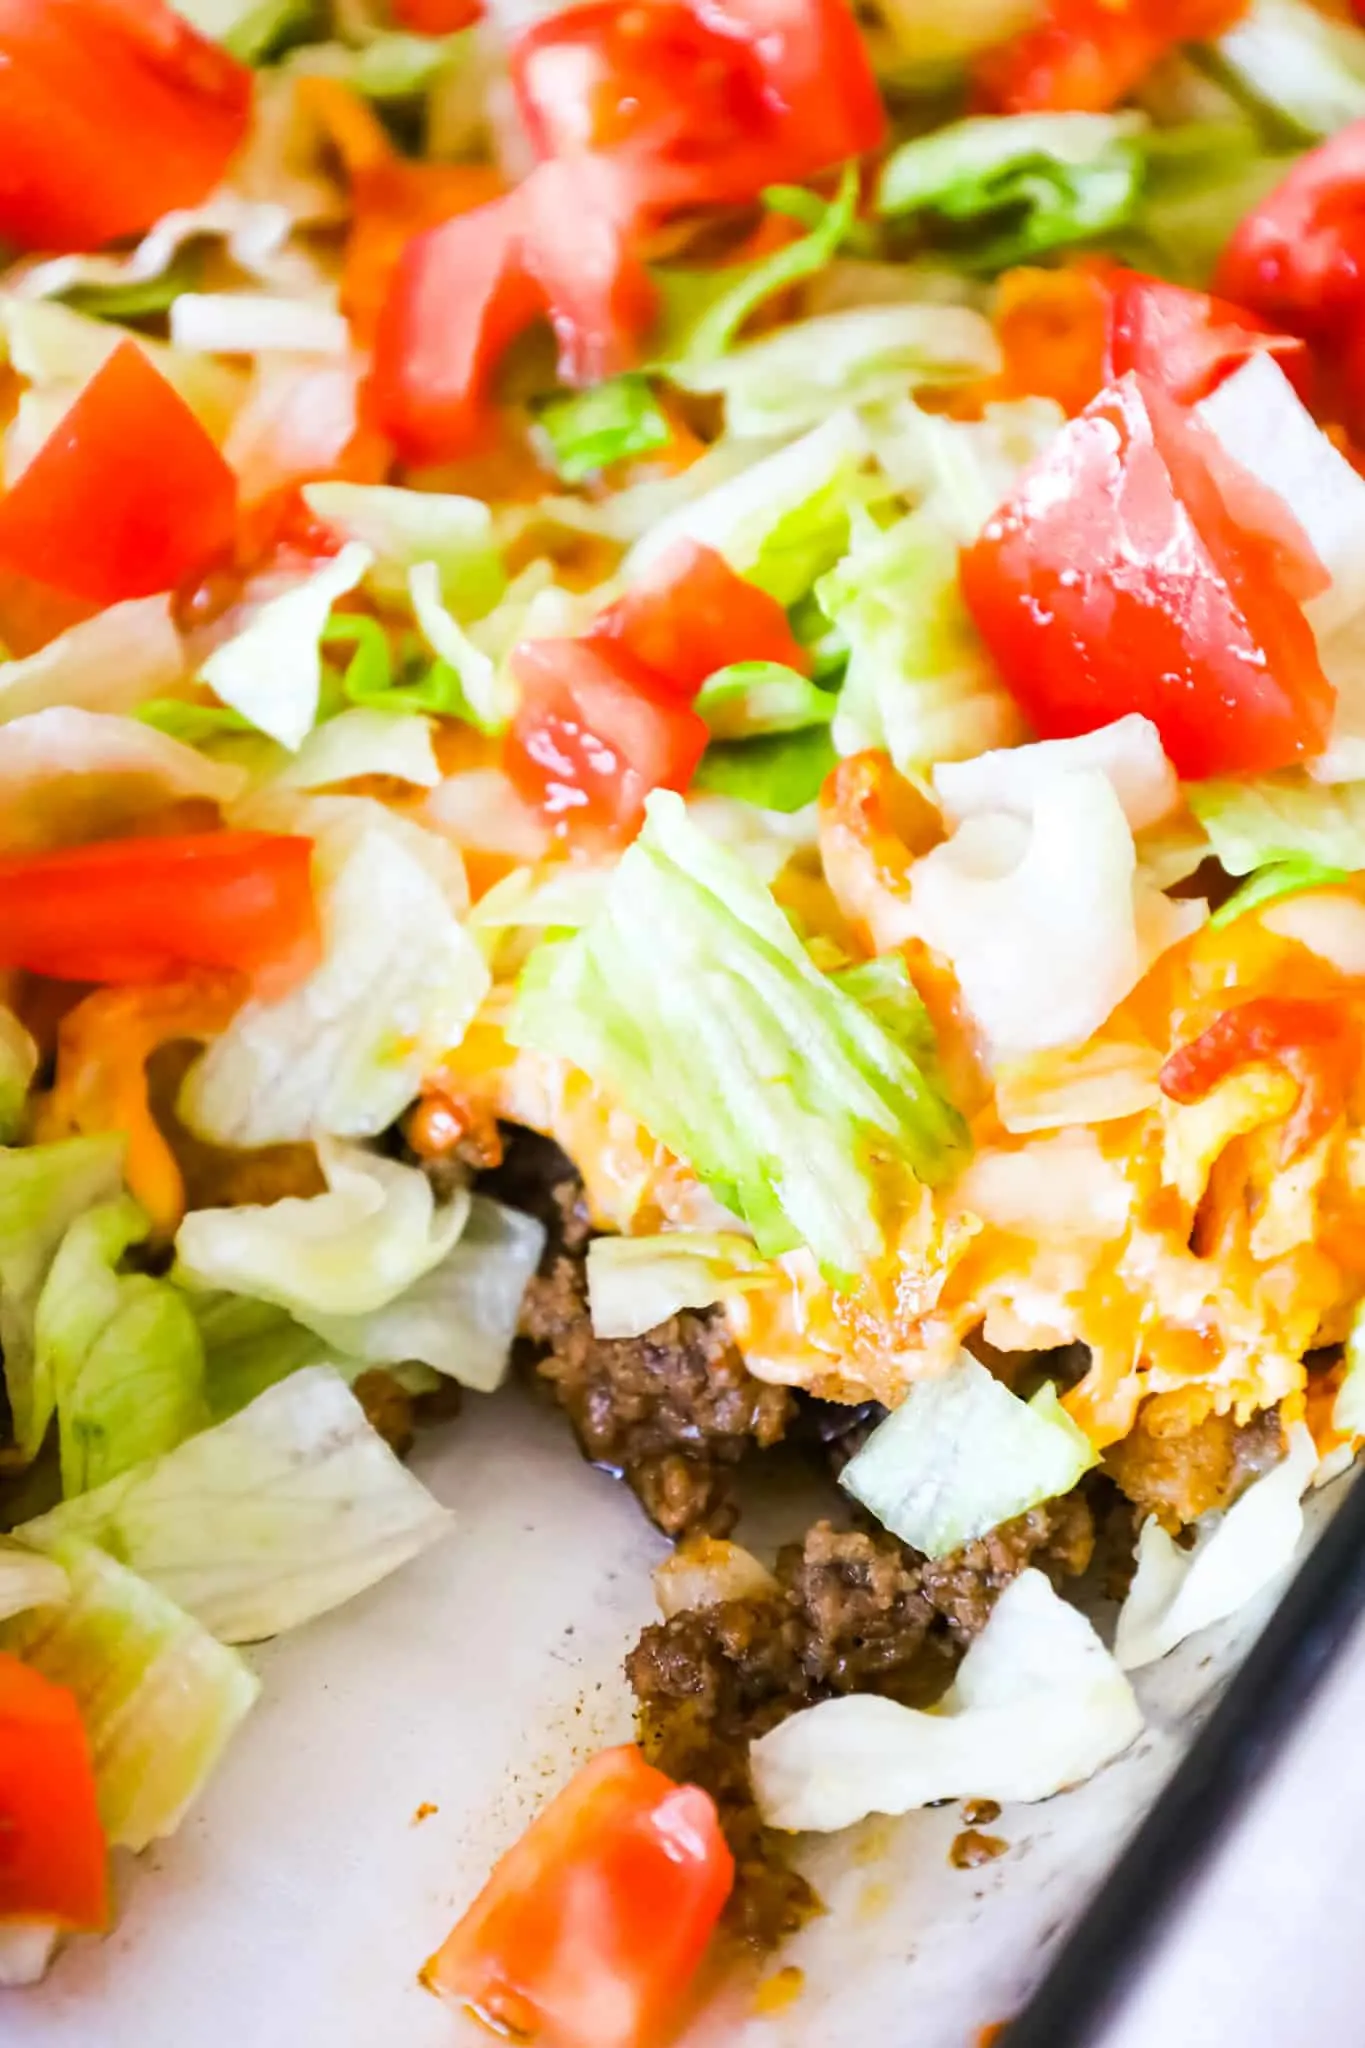 Walking Taco Casserole is an easy ground beef dinner recipe loaded with diced onions, Fritos corn chips, shredded nacho cheese blend, lettuce and diced tomatoes.